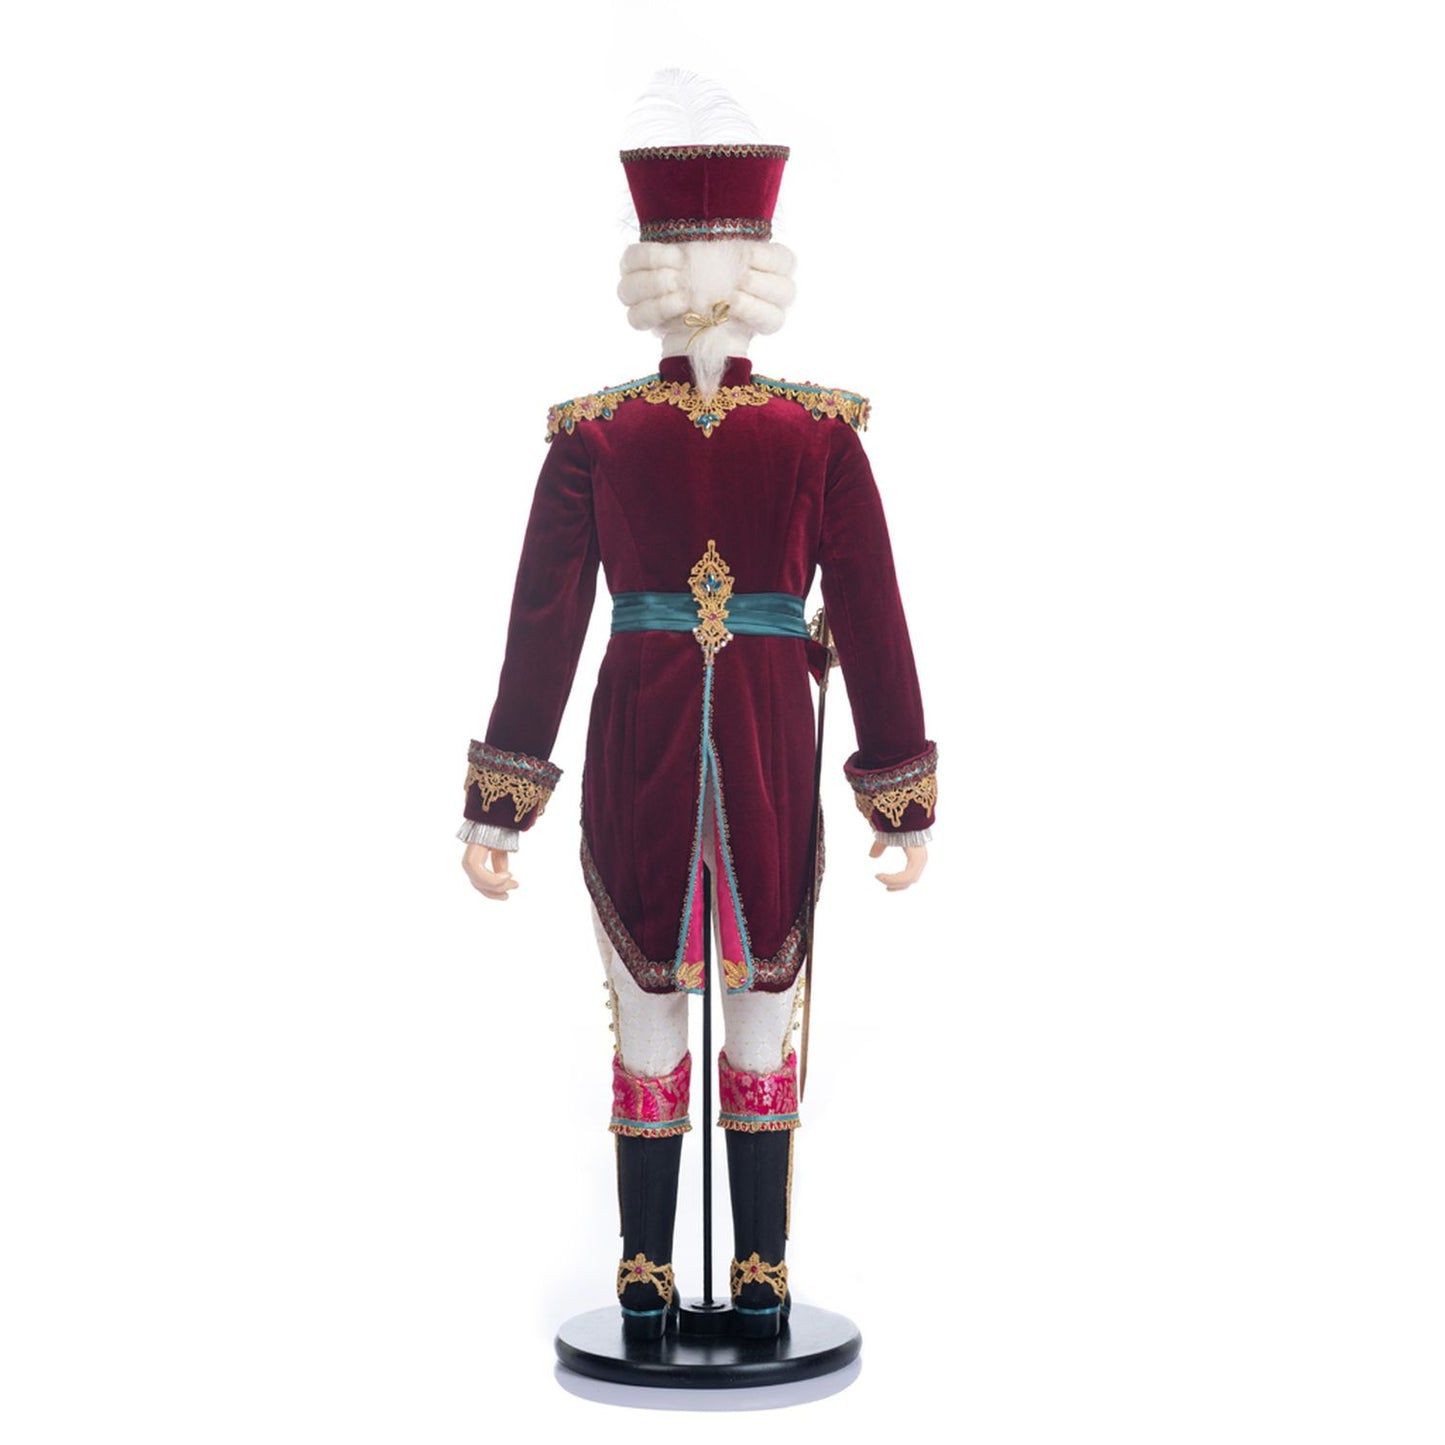 Katherine's Collection Sugar Plum Prince Doll 32-Inch, 12x9x38 Inches, White/Red